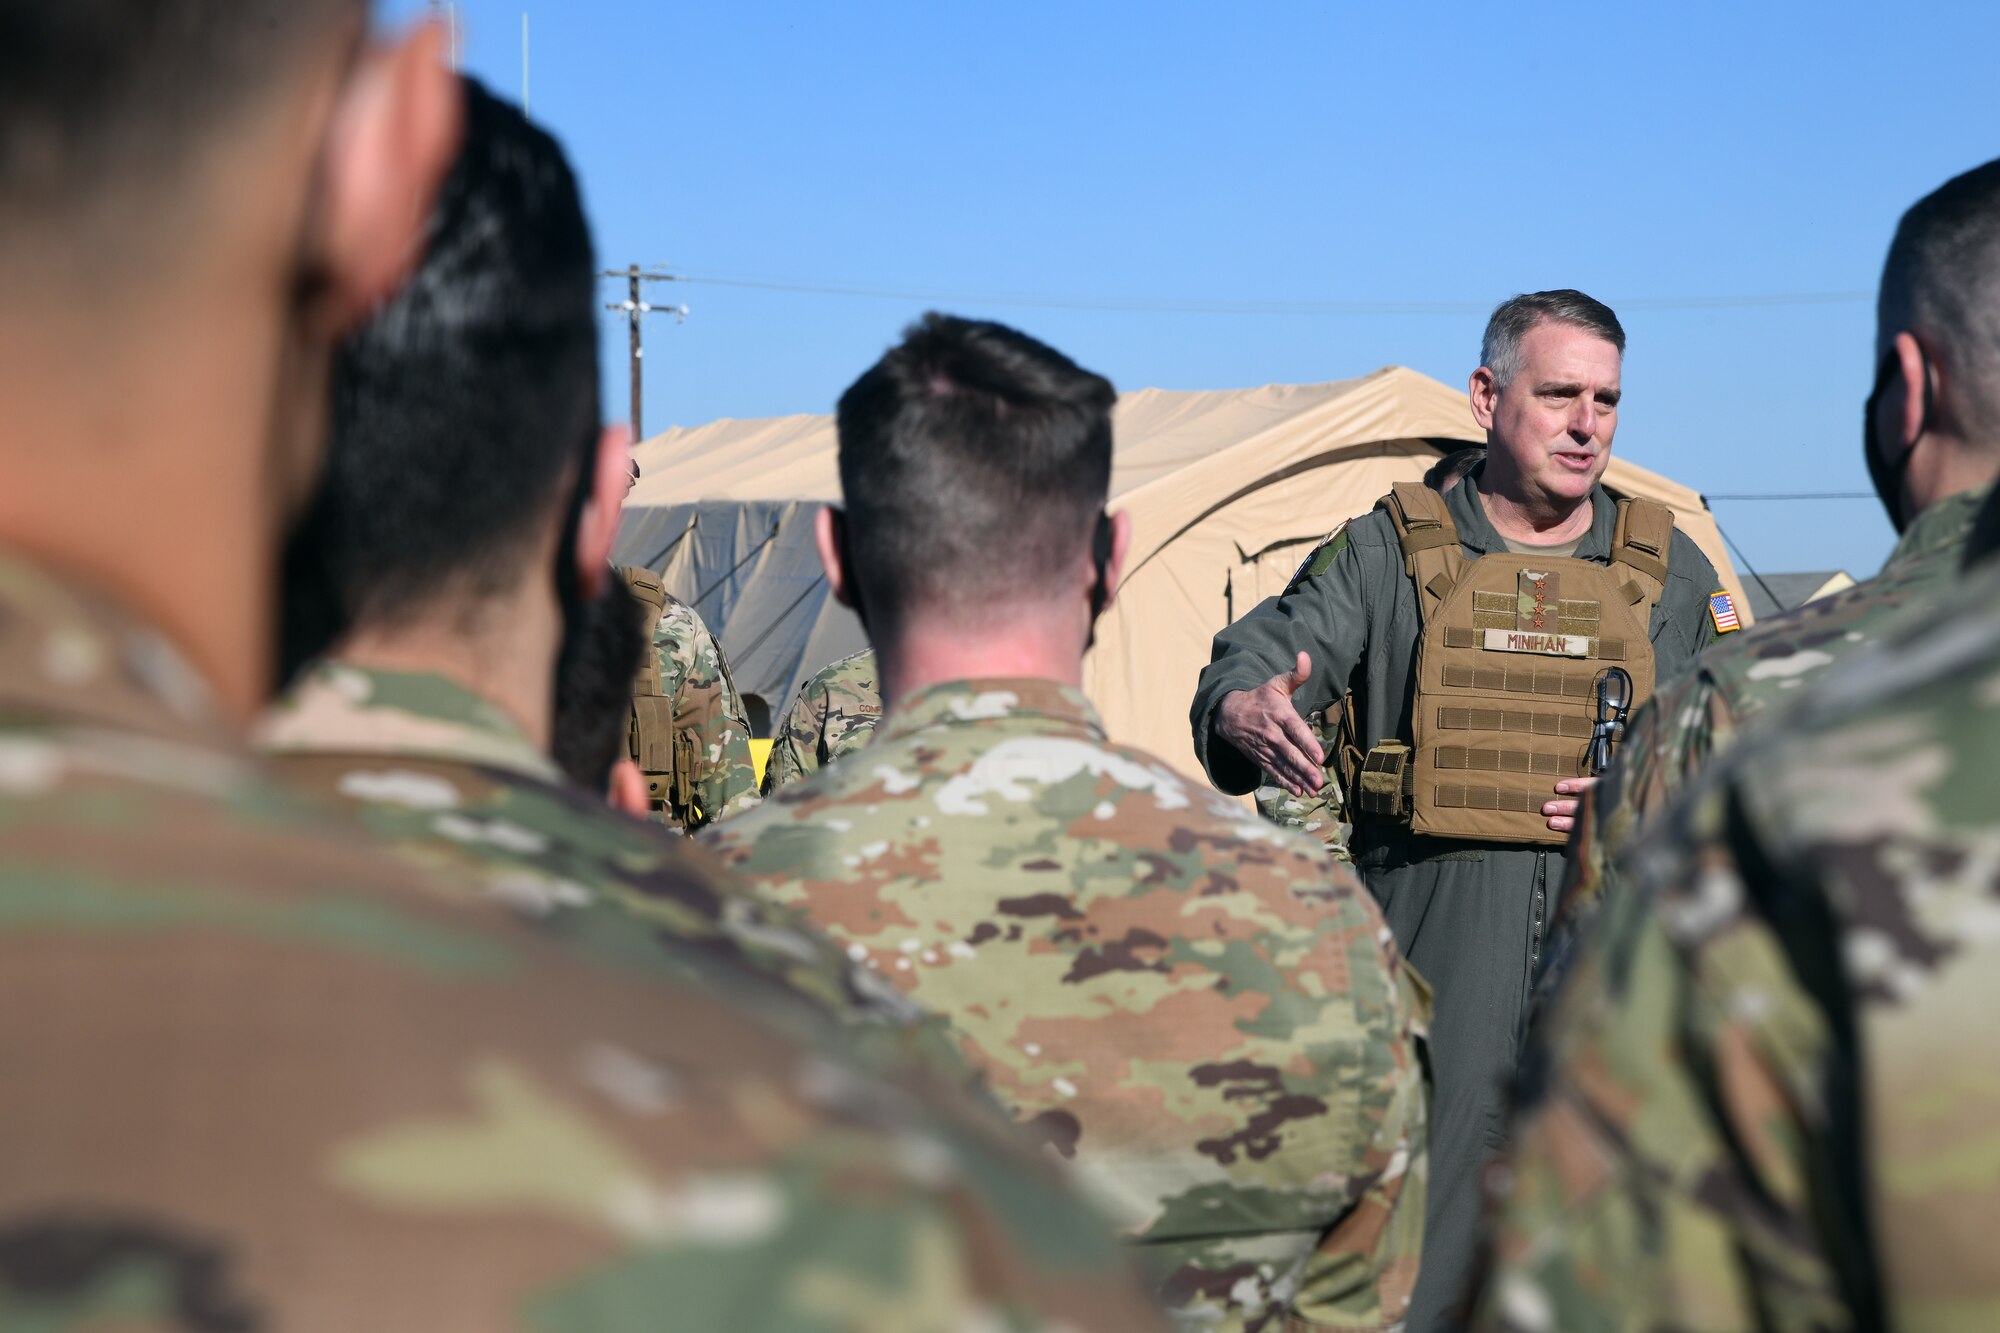 U.S. Air Force Gen. Mike Minihan, commander of Air Mobility Command, addresses 621st Contingency Response Wing Airmen prior to departing the wing for the remainder of his base visit Feb. 11, 2022, at Travis Air Force Base, California. Minihan discussed how they have been a pioneering force for Multi-capable Airmen as well as the legacy of impact CR operations have had over the years, including the wing’s support to Operations Allies Refuge and Allies Welcome in 2021. (U.S. Air Force photo by Master Sgt. Melissa B. White)